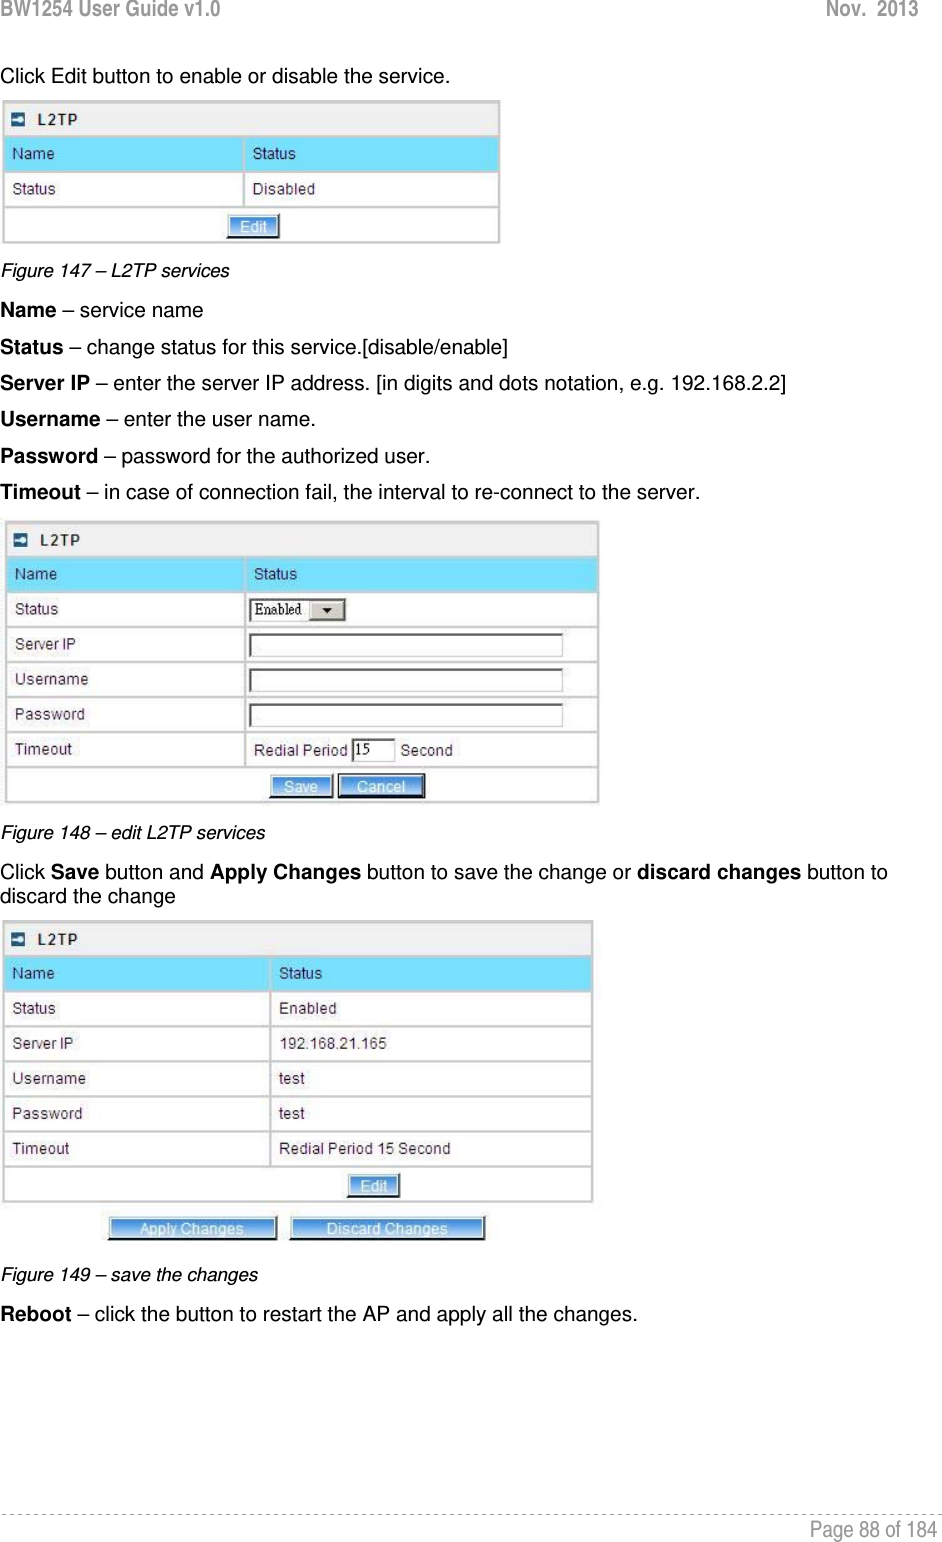 BW1254 User Guide v1.0  Nov.  2013     Page 88 of 184   Click Edit button to enable or disable the service.  Figure 147 – L2TP services Name – service name Status – change status for this service.[disable/enable] Server IP – enter the server IP address. [in digits and dots notation, e.g. 192.168.2.2] Username – enter the user name. Password – password for the authorized user. Timeout – in case of connection fail, the interval to re-connect to the server.  Figure 148 – edit L2TP services Click Save button and Apply Changes button to save the change or discard changes button to discard the change  Figure 149 – save the changes Reboot – click the button to restart the AP and apply all the changes. 